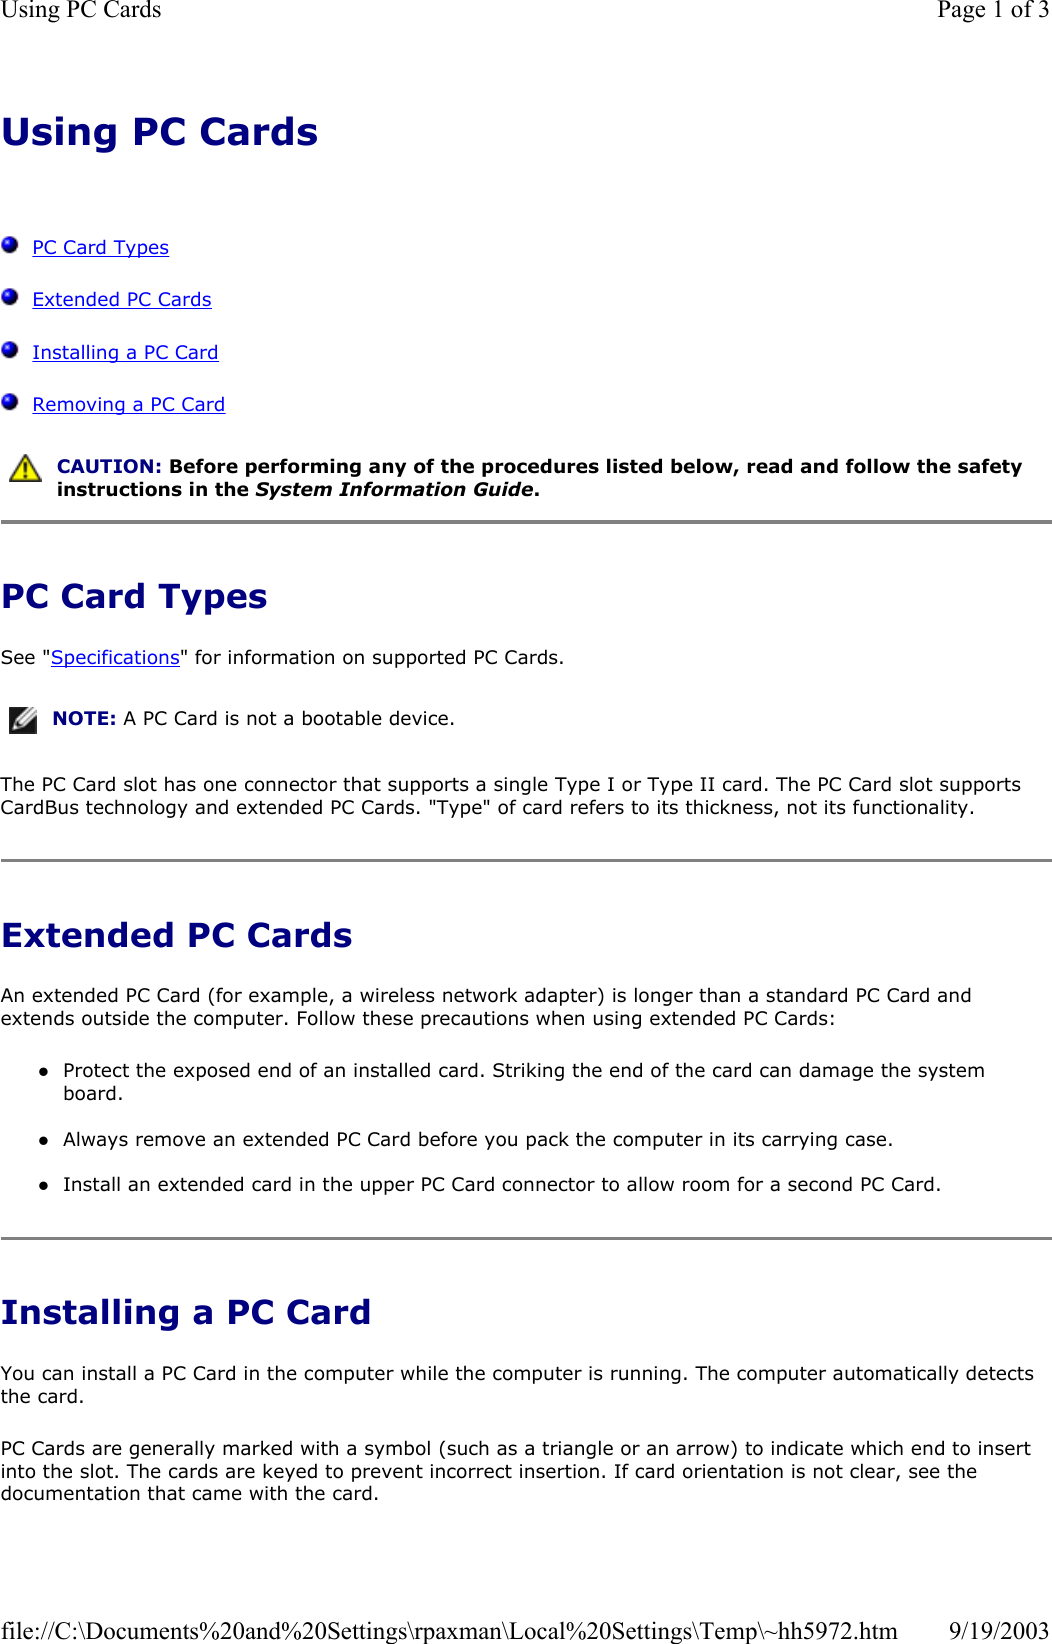 Using PC Cards      PC Card Types   Extended PC Cards   Installing a PC Card   Removing a PC Card  PC Card Types See &quot;Specifications&quot; for information on supported PC Cards. The PC Card slot has one connector that supports a single Type I or Type II card. The PC Card slot supports CardBus technology and extended PC Cards. &quot;Type&quot; of card refers to its thickness, not its functionality. Extended PC Cards An extended PC Card (for example, a wireless network adapter) is longer than a standard PC Card and extends outside the computer. Follow these precautions when using extended PC Cards: zProtect the exposed end of an installed card. Striking the end of the card can damage the system board.  zAlways remove an extended PC Card before you pack the computer in its carrying case.  zInstall an extended card in the upper PC Card connector to allow room for a second PC Card.  Installing a PC Card You can install a PC Card in the computer while the computer is running. The computer automatically detects the card. PC Cards are generally marked with a symbol (such as a triangle or an arrow) to indicate which end to insert into the slot. The cards are keyed to prevent incorrect insertion. If card orientation is not clear, see the documentation that came with the card.   CAUTION: Before performing any of the procedures listed below, read and follow the safety instructions in the System Information Guide. NOTE: A PC Card is not a bootable device.Page 1 of 3Using PC Cards9/19/2003file://C:\Documents%20and%20Settings\rpaxman\Local%20Settings\Temp\~hh5972.htm